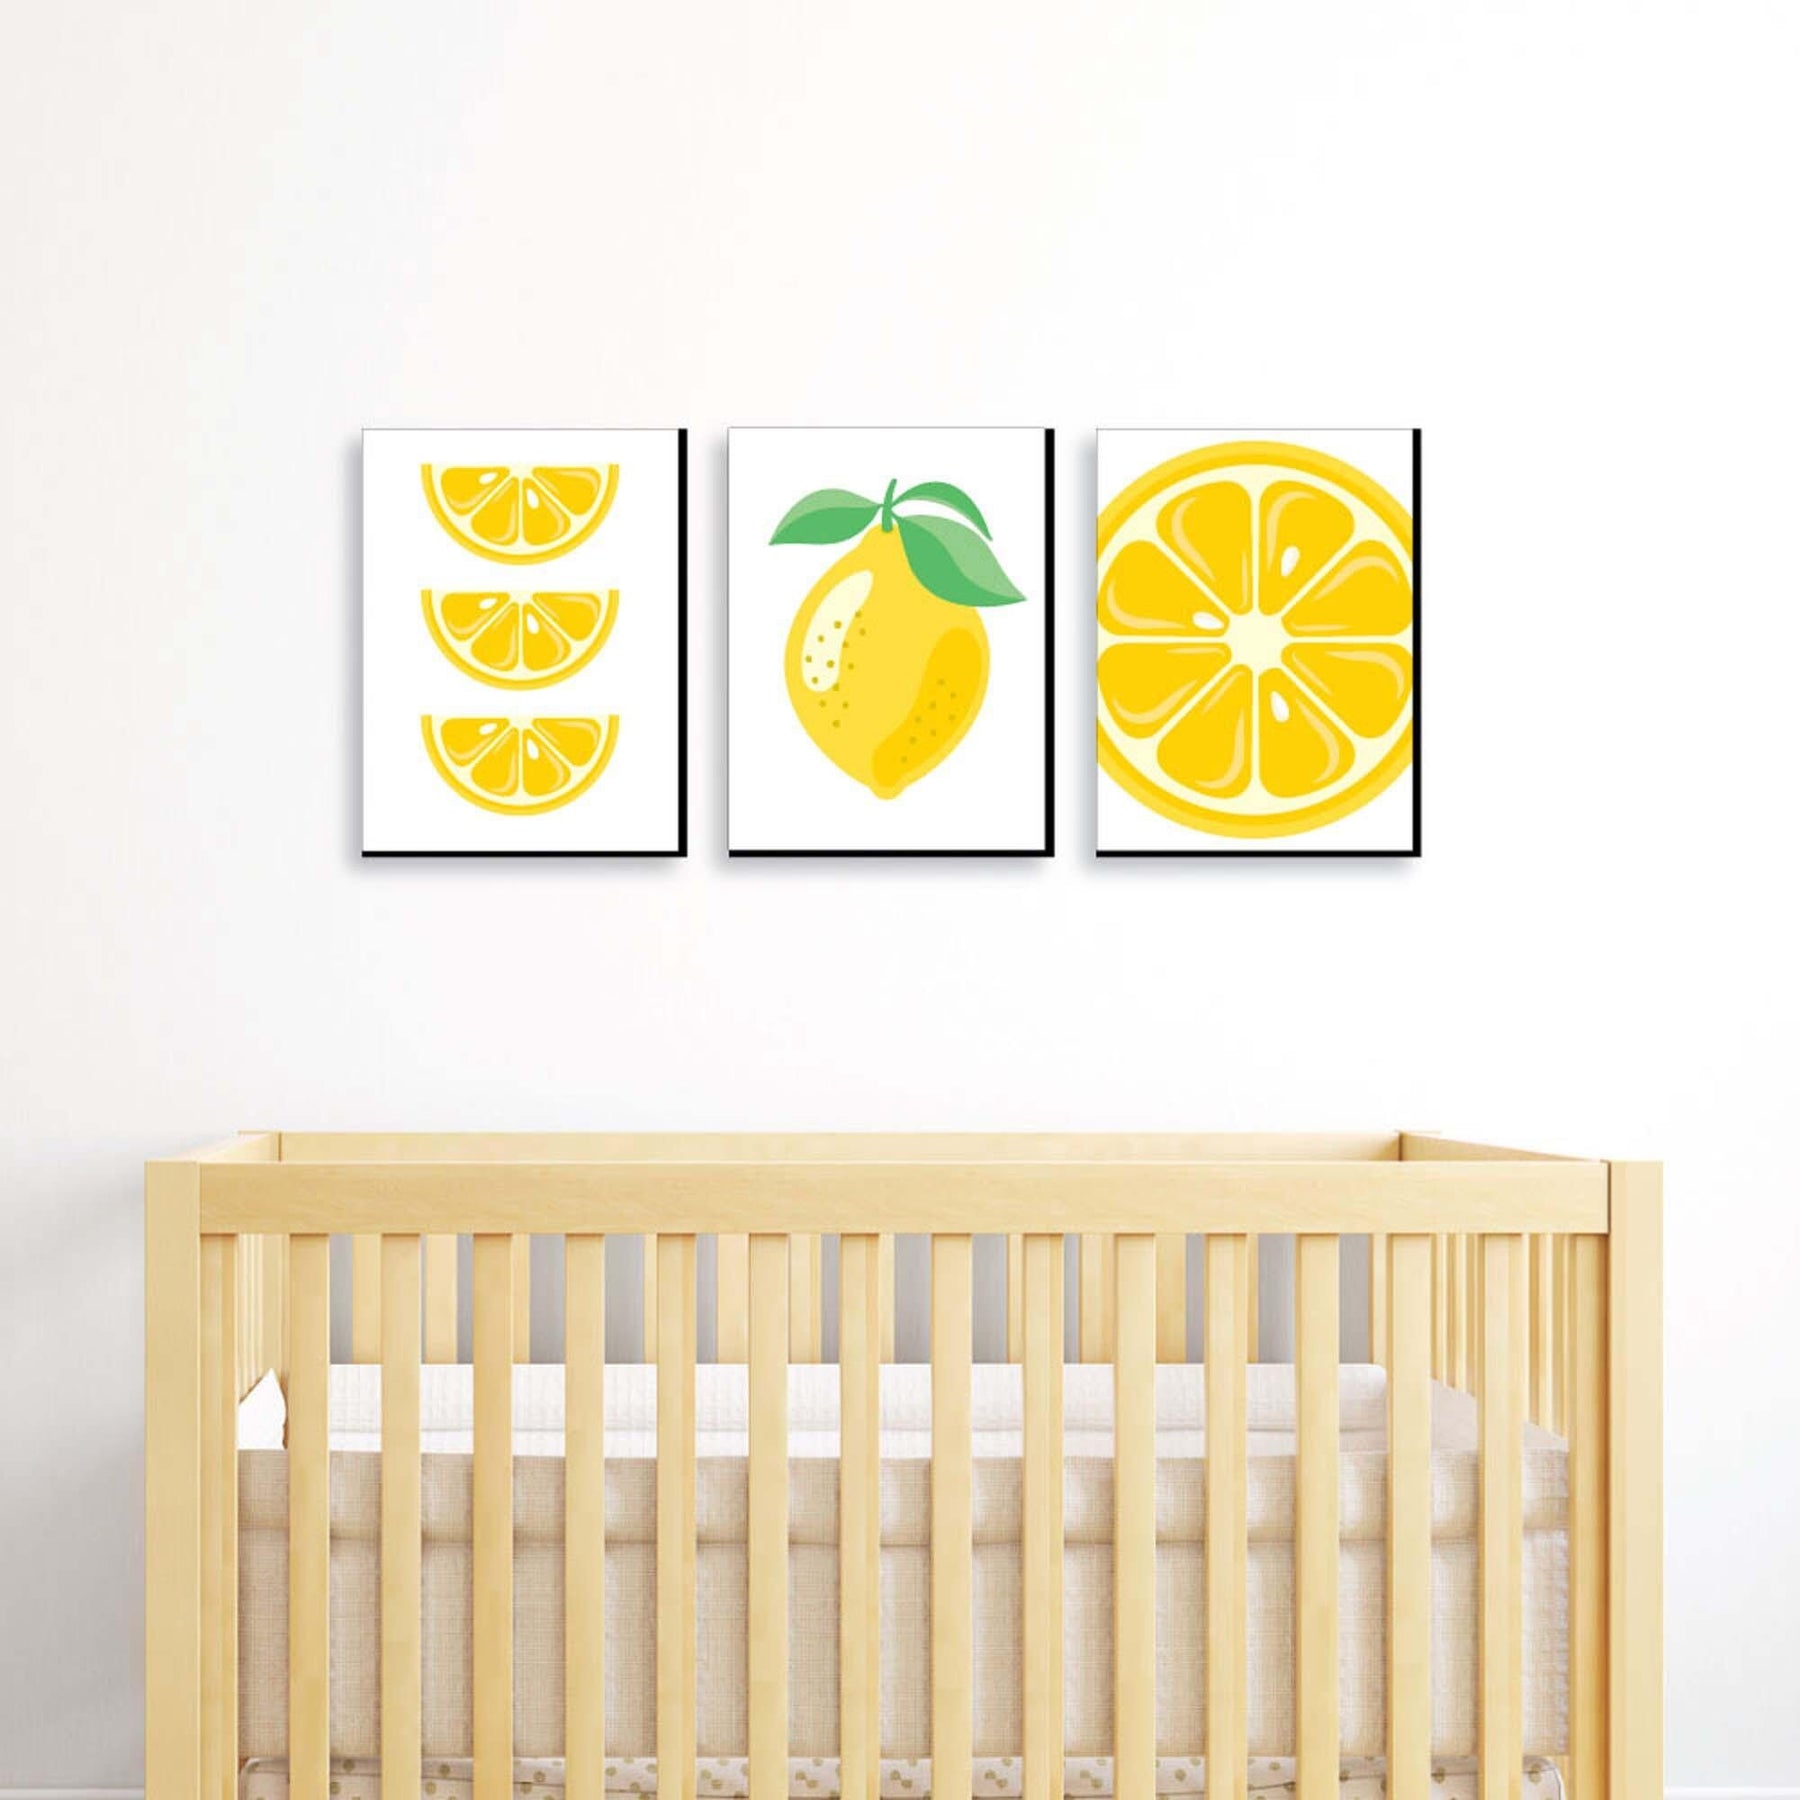 Big Dot of Happiness Little Bumblebee - Bee Nursery Wall Art and Kitchen Decor - 7.5 x 10 Inches - Set of 3 Prints